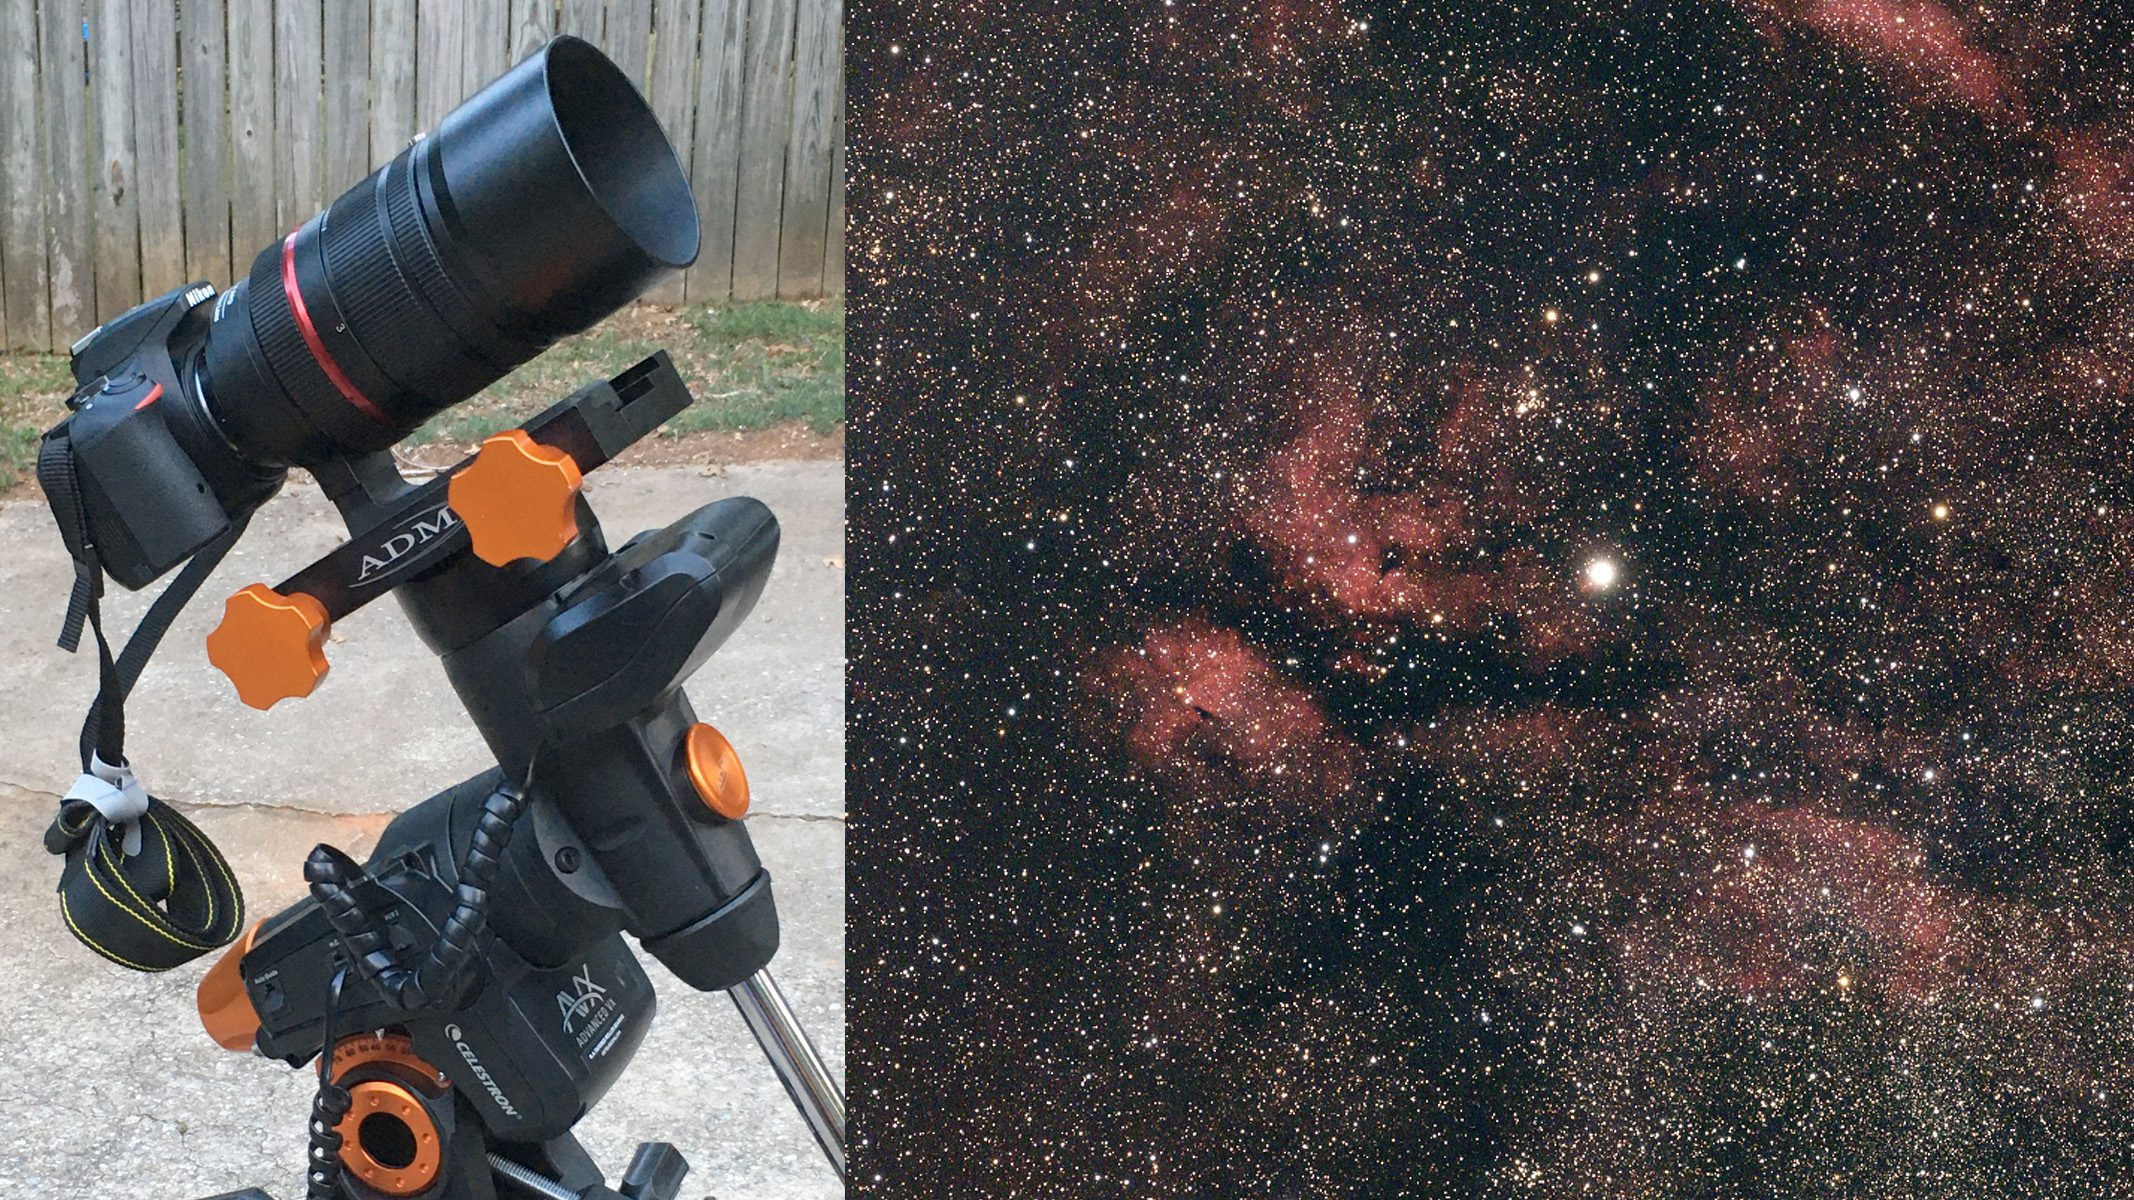 The nebula image is formed next to the telescope setting